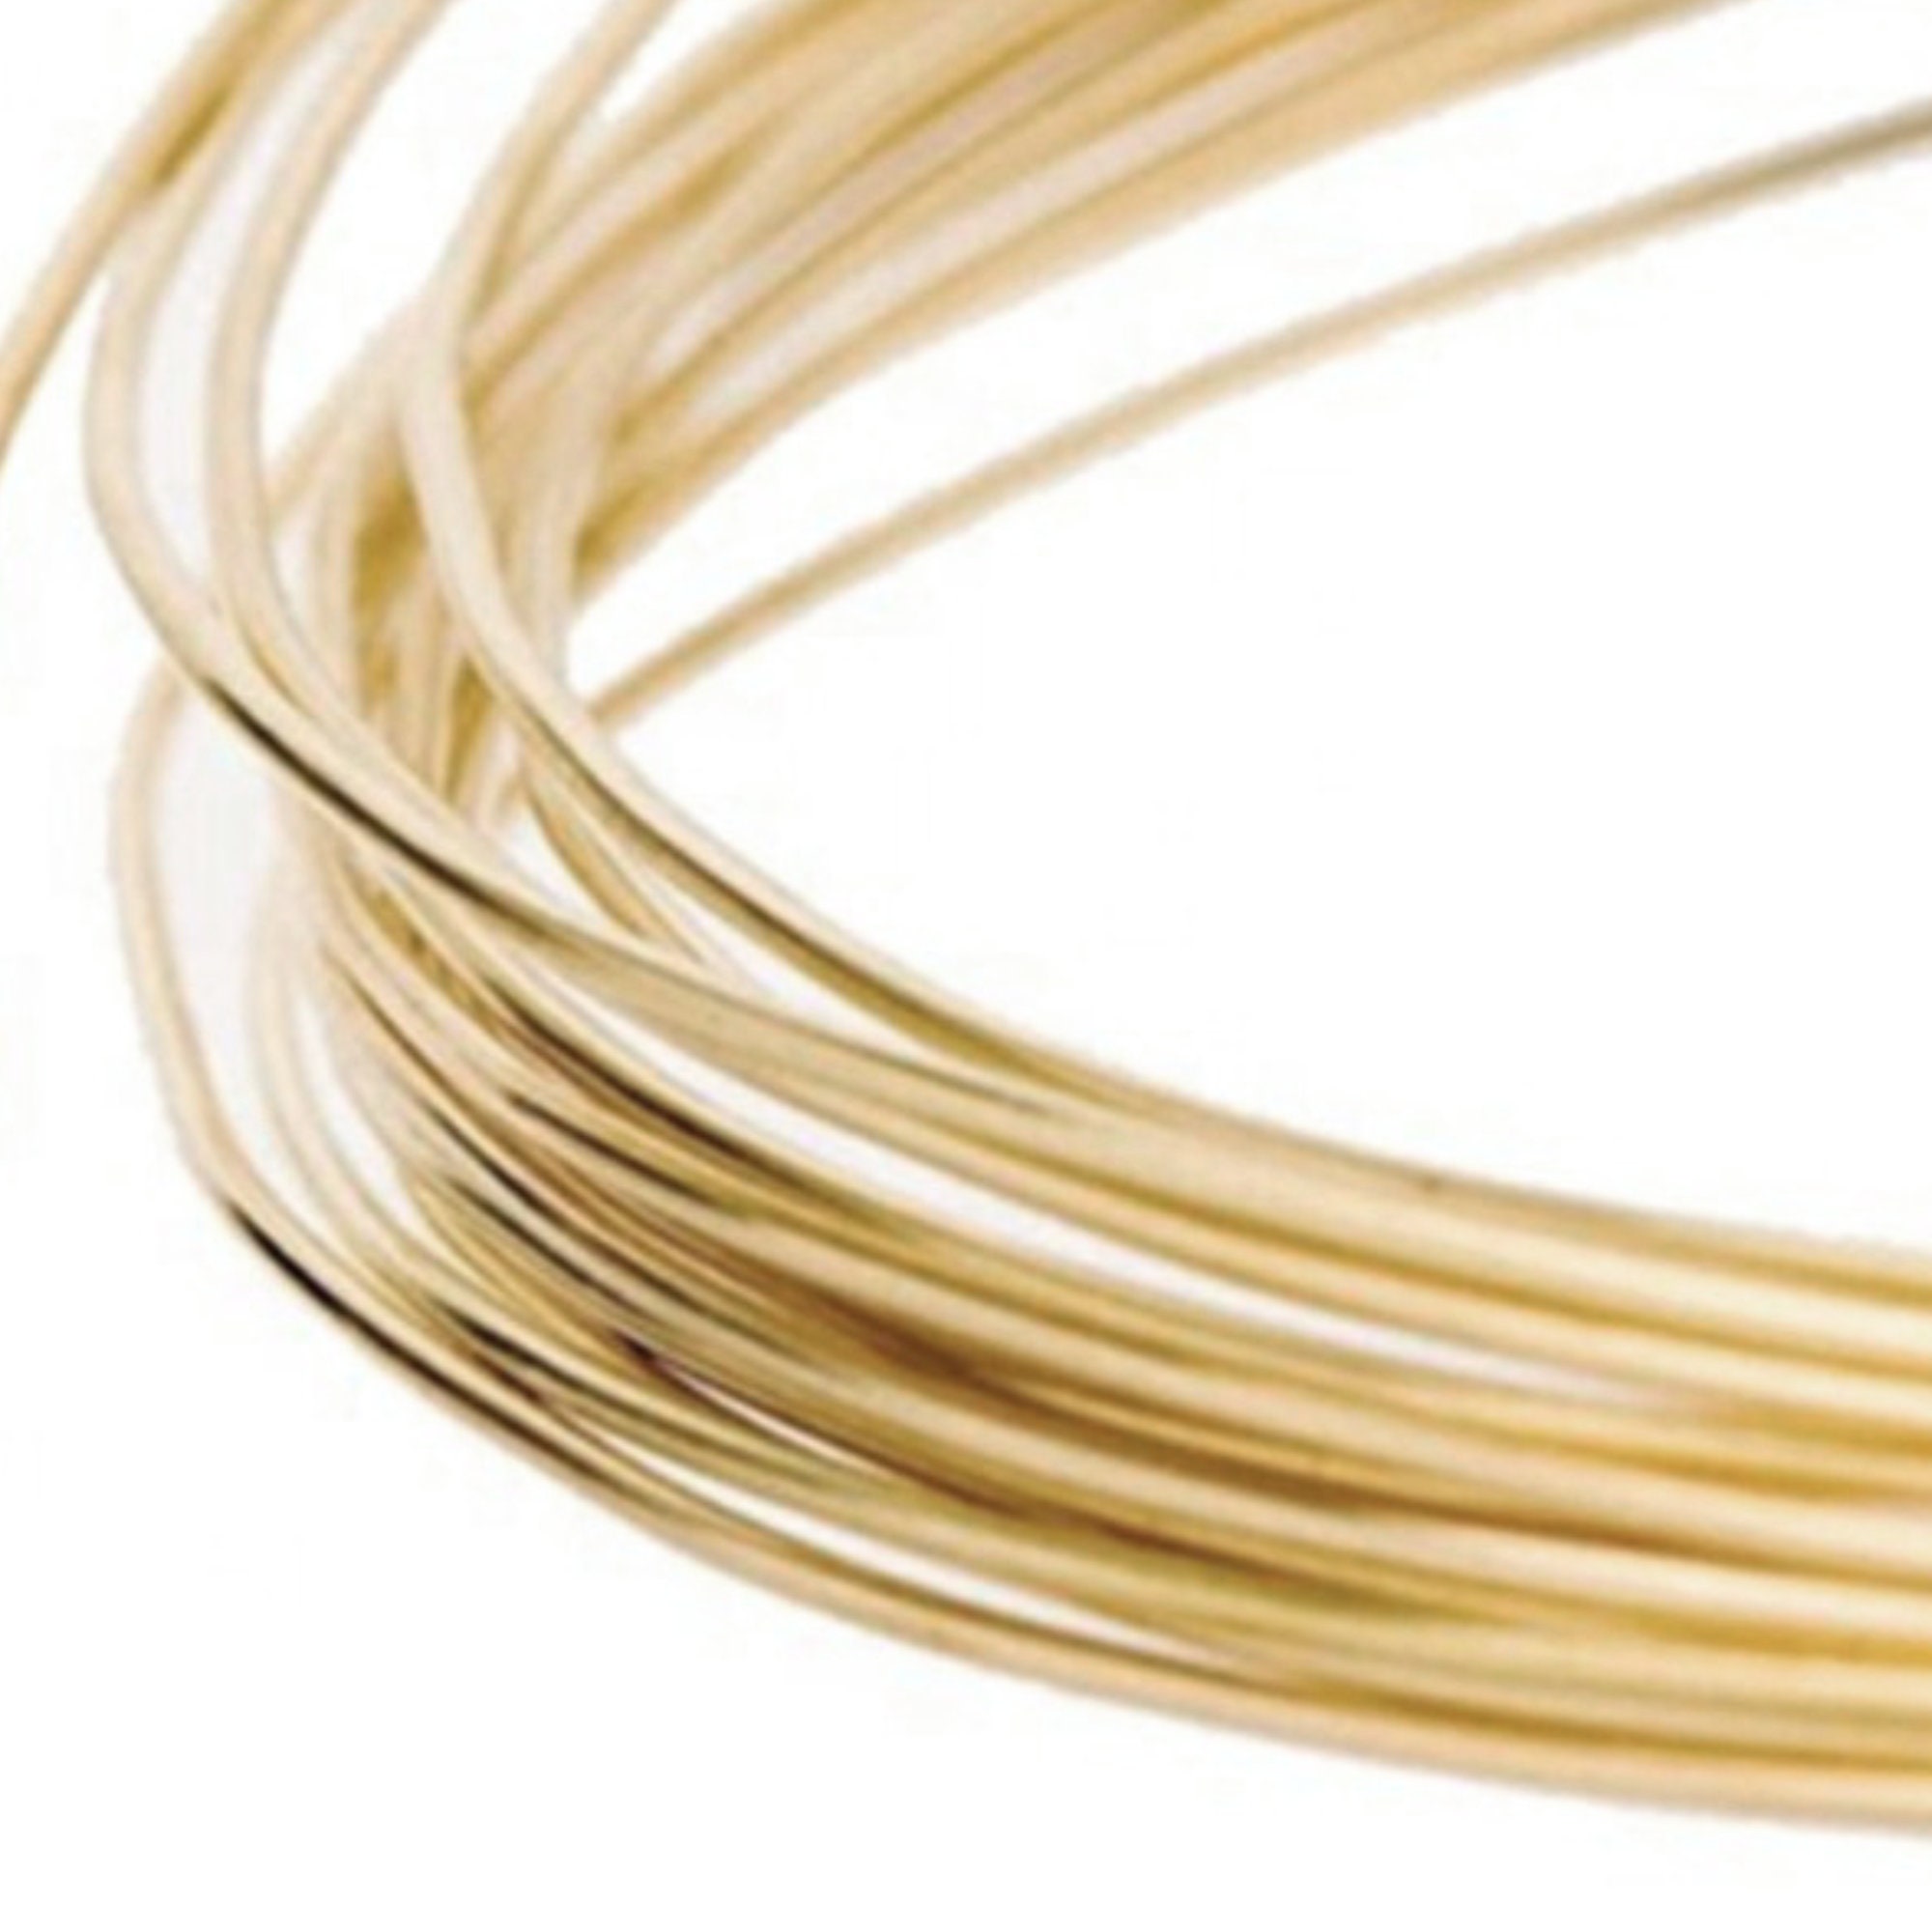 24K Solid Yellow Gold Wire Round 1/4 Hard